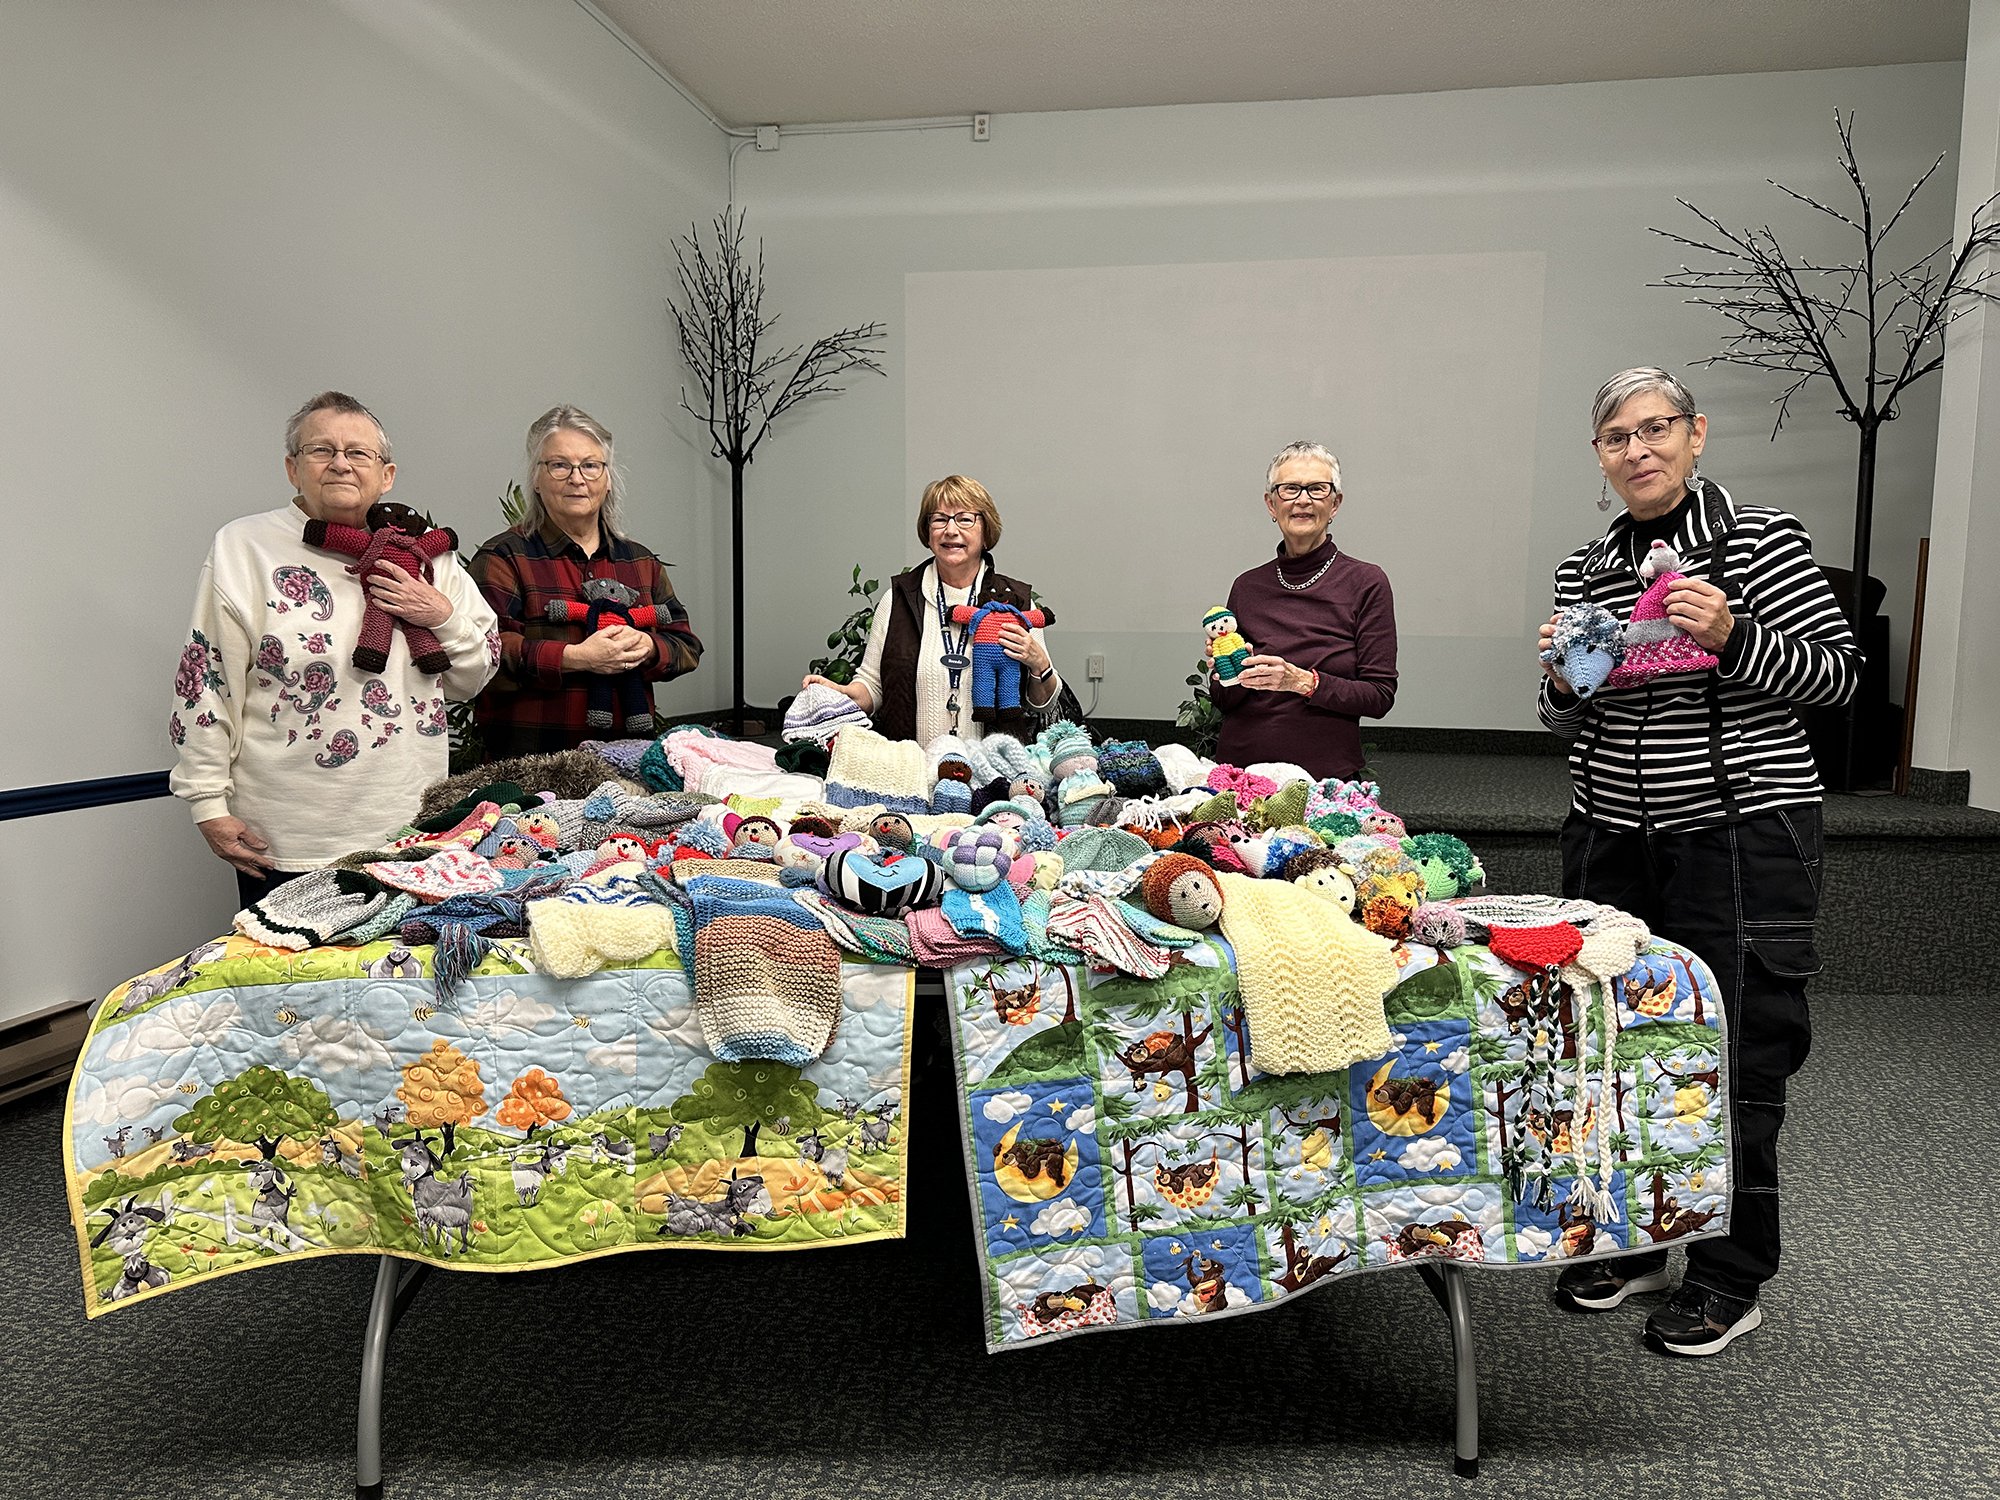 Members of the Orange thREADs fabric artist group stand behind a table of knitted, crocheted, and quilted donations